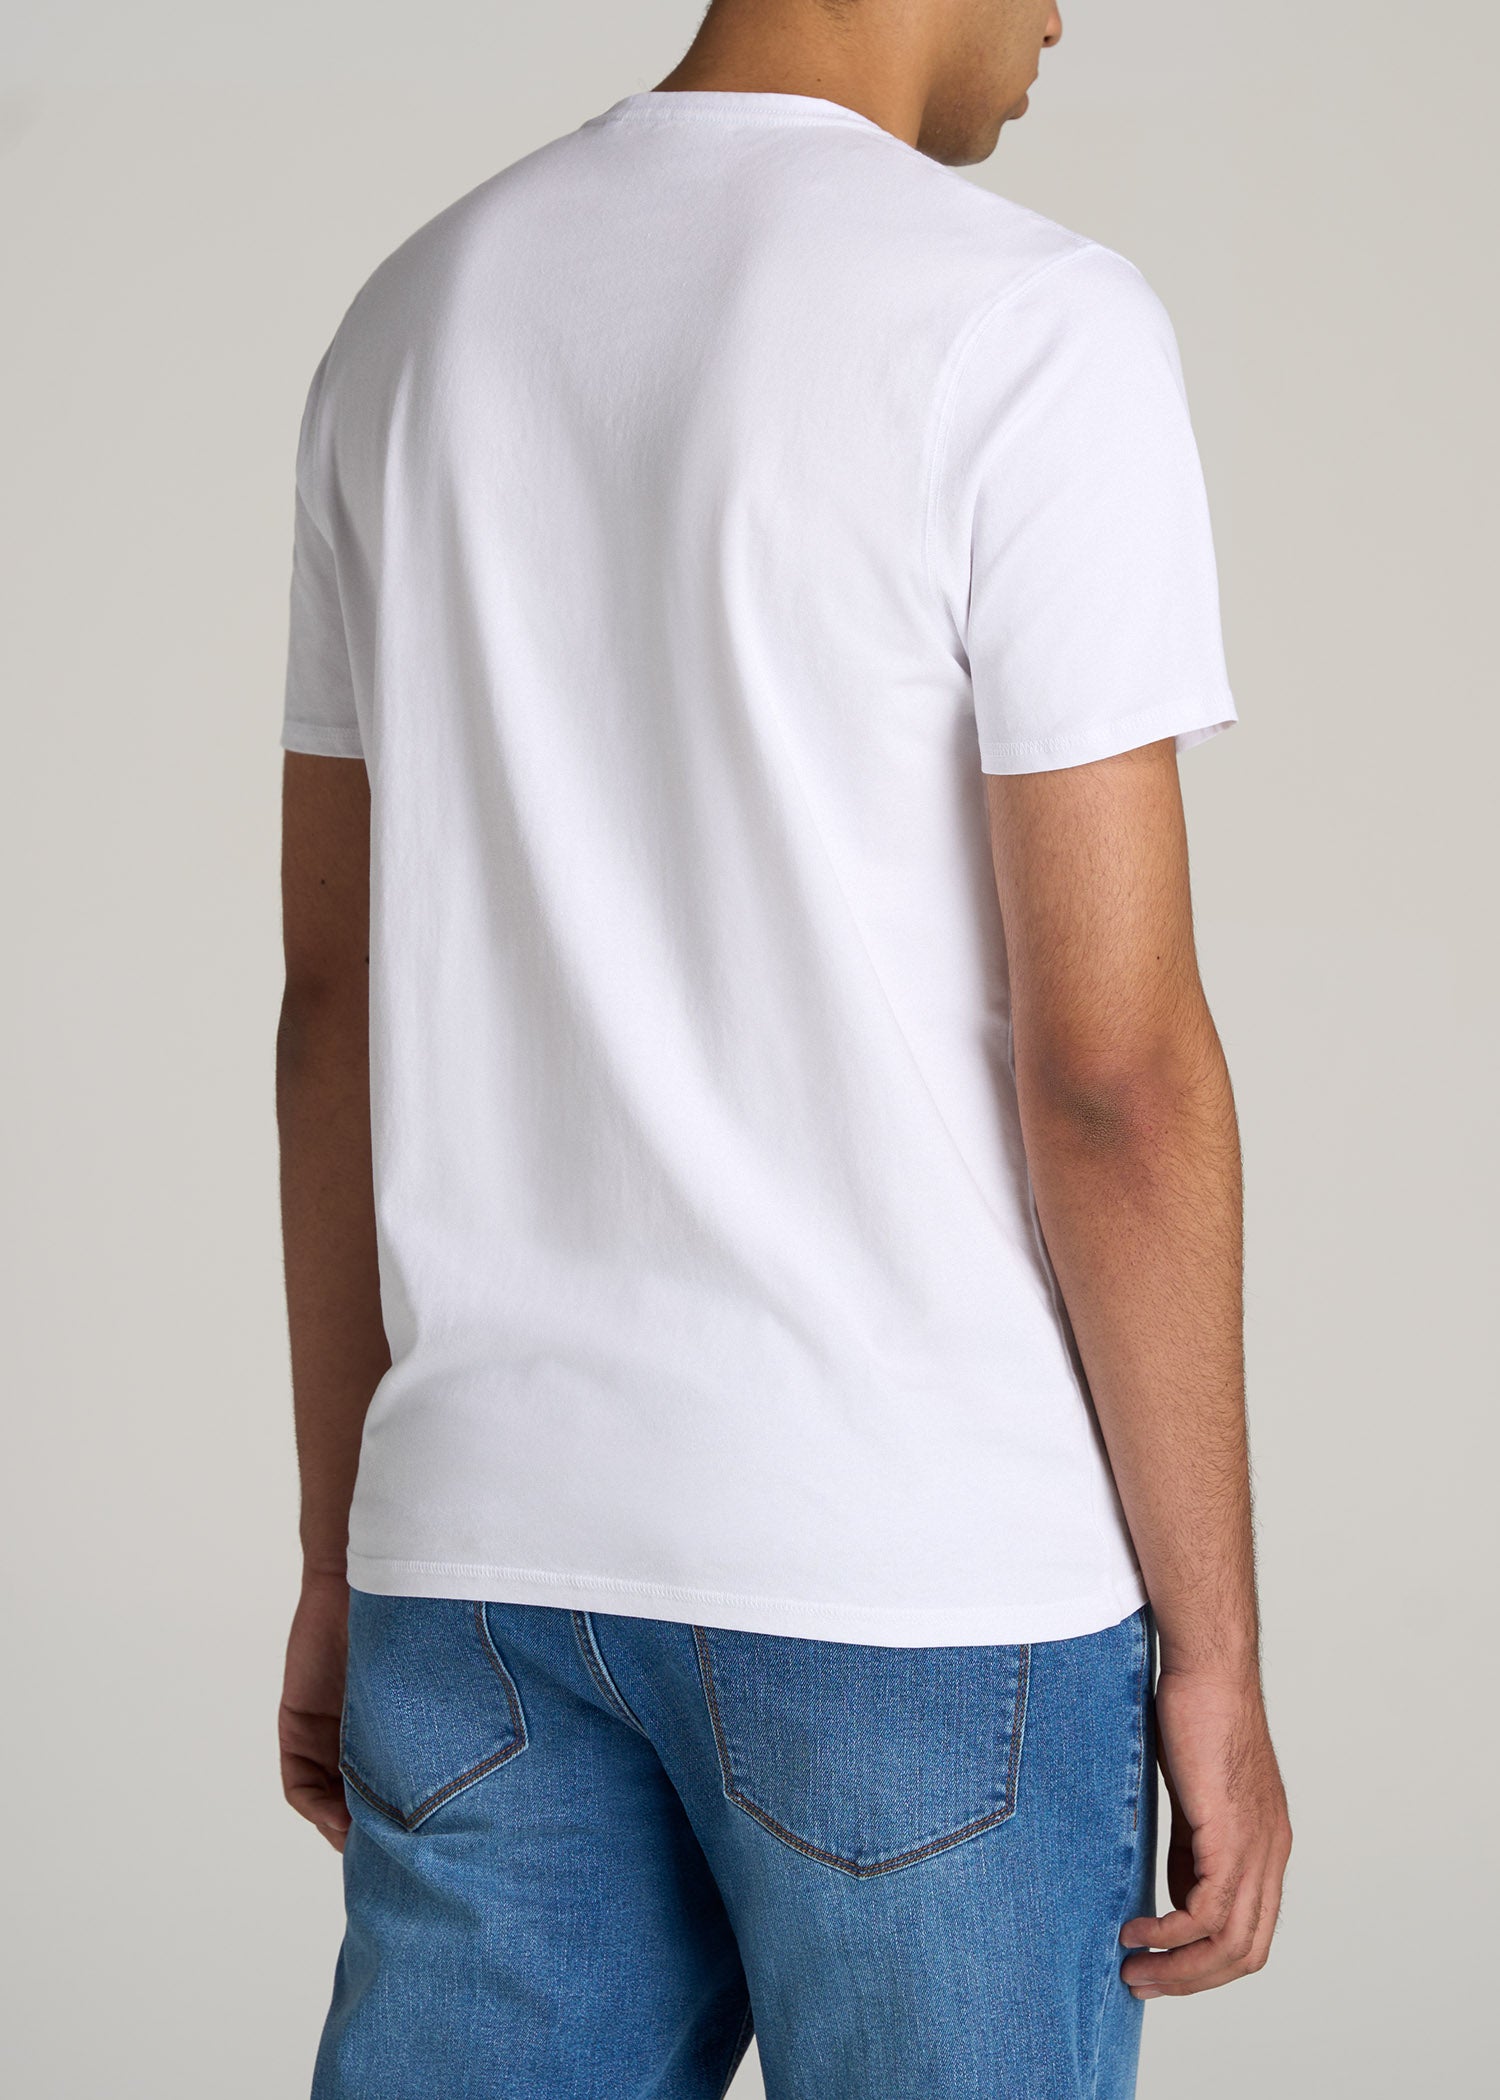 Essential Regular Fit Tall Crew Men's Tee White | American Tall